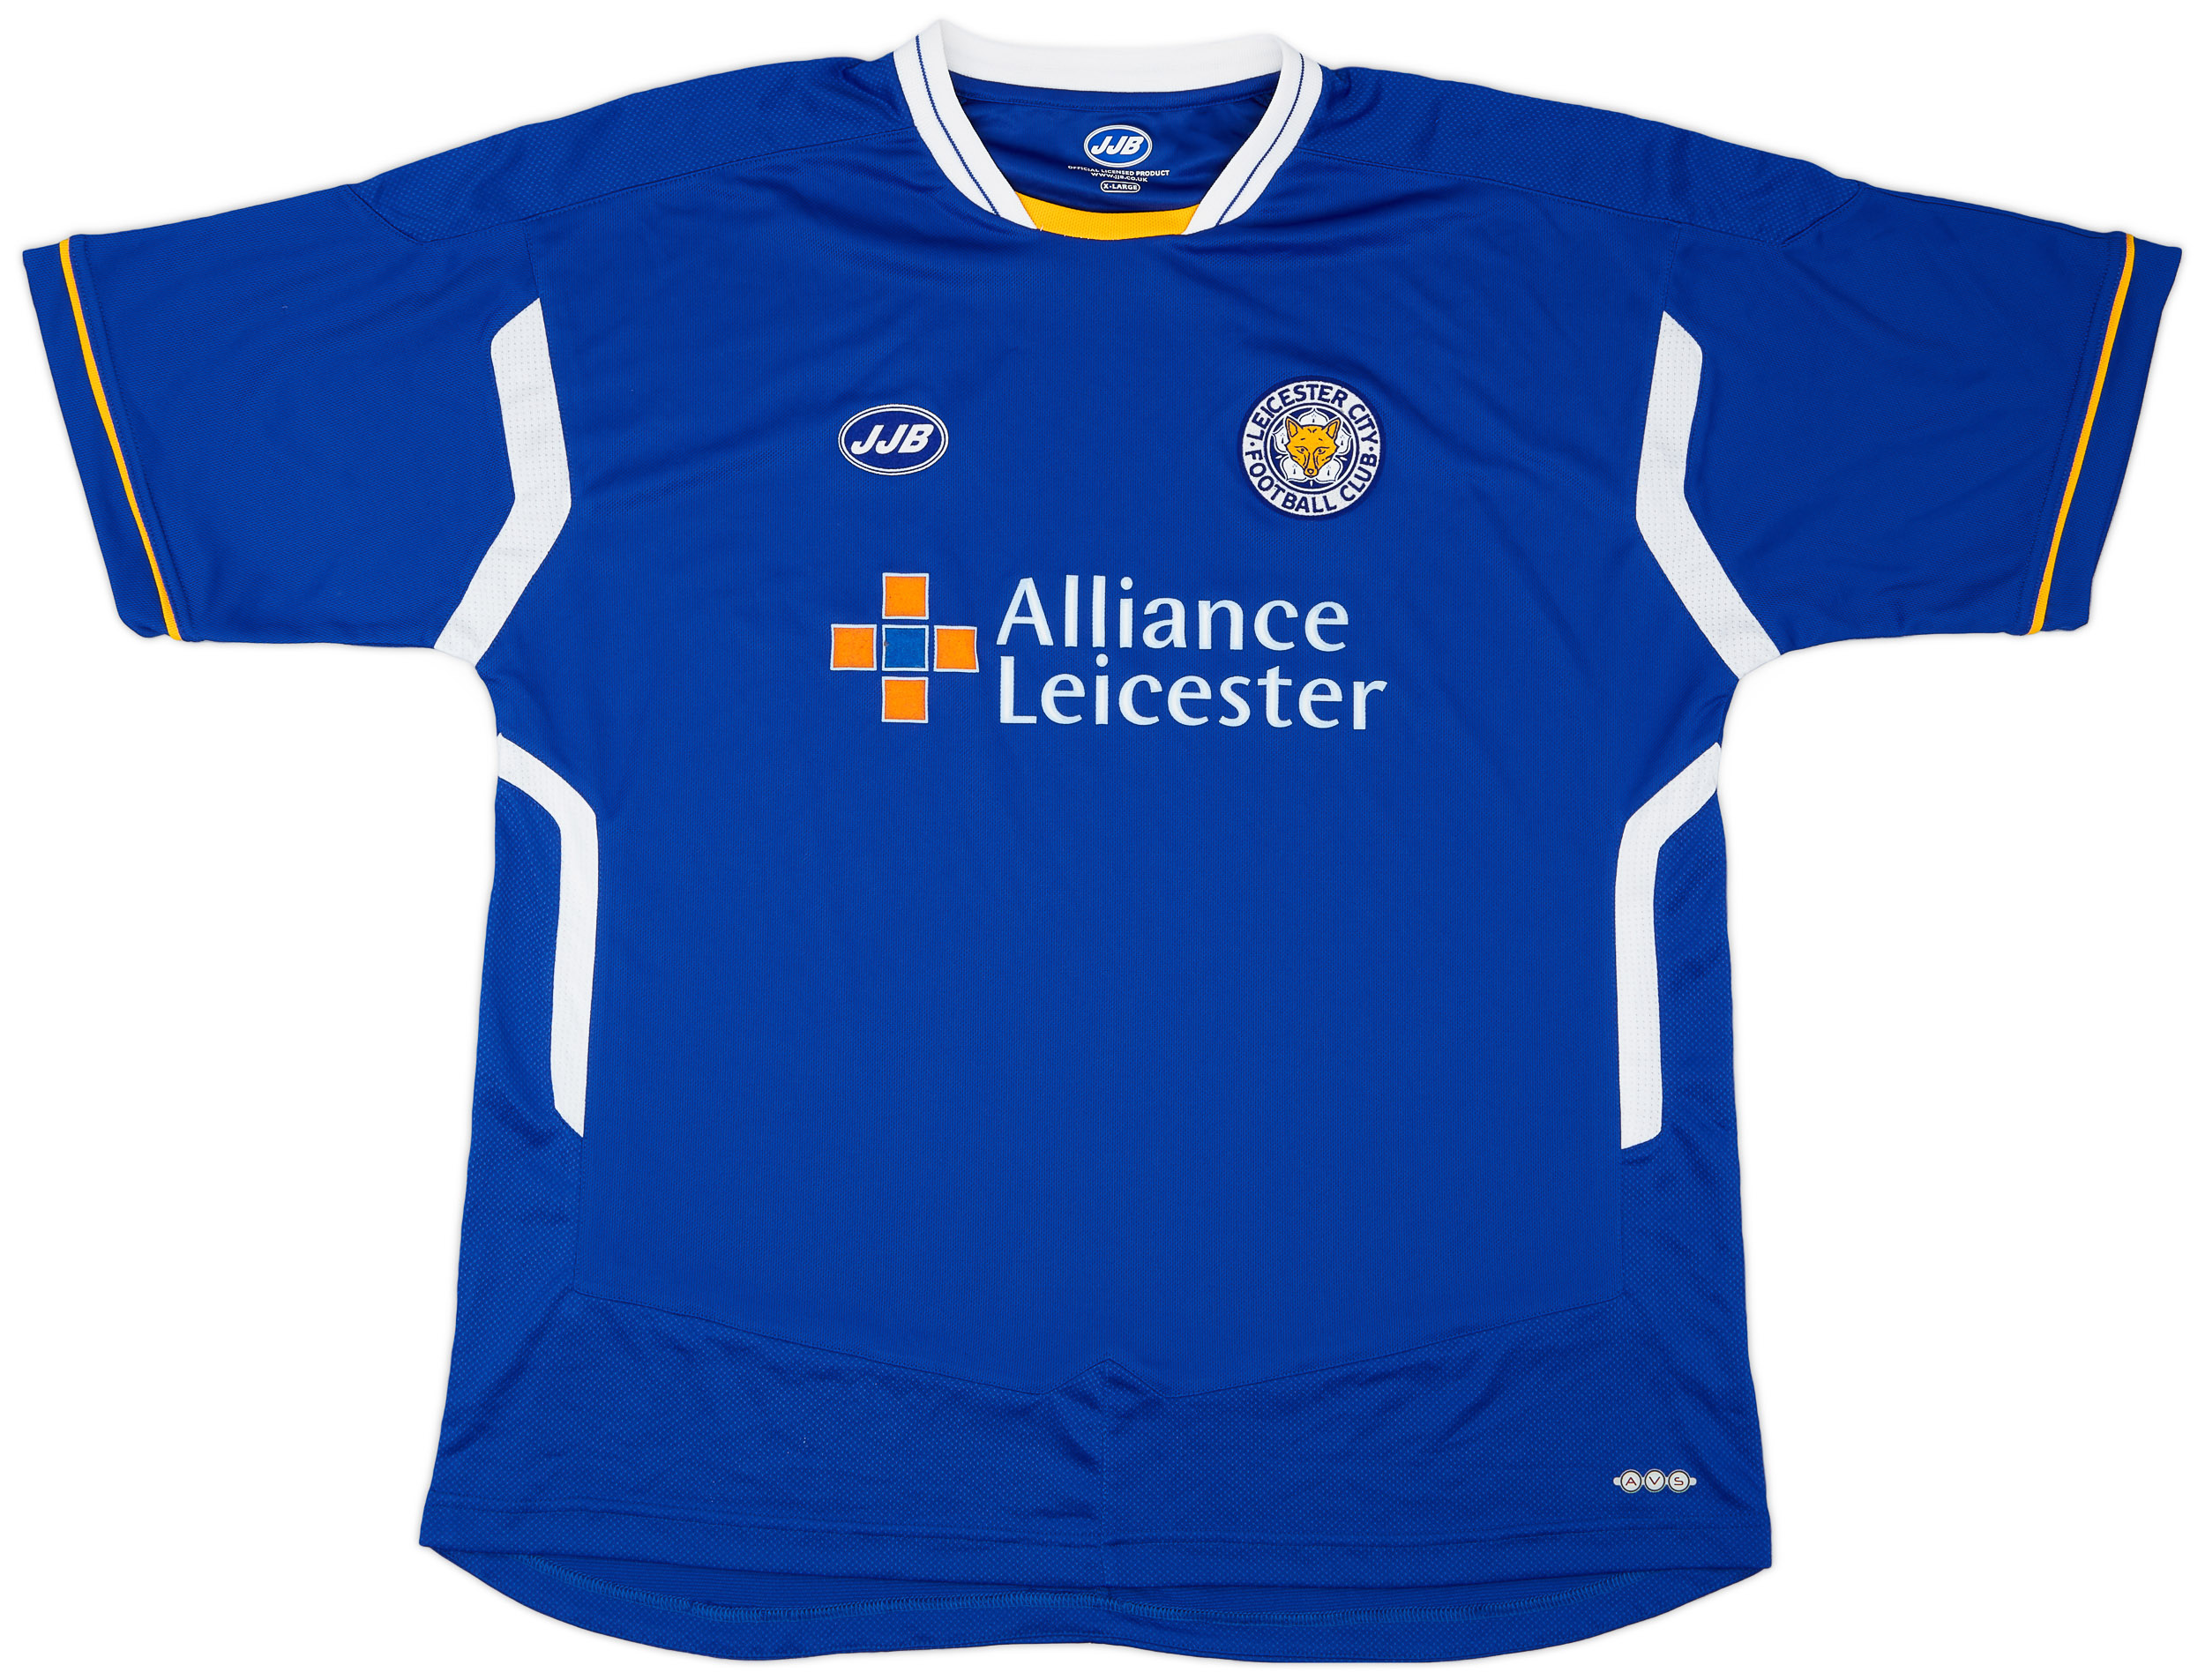 2005-06 Leicester Home Shirt - 9/10 - ()